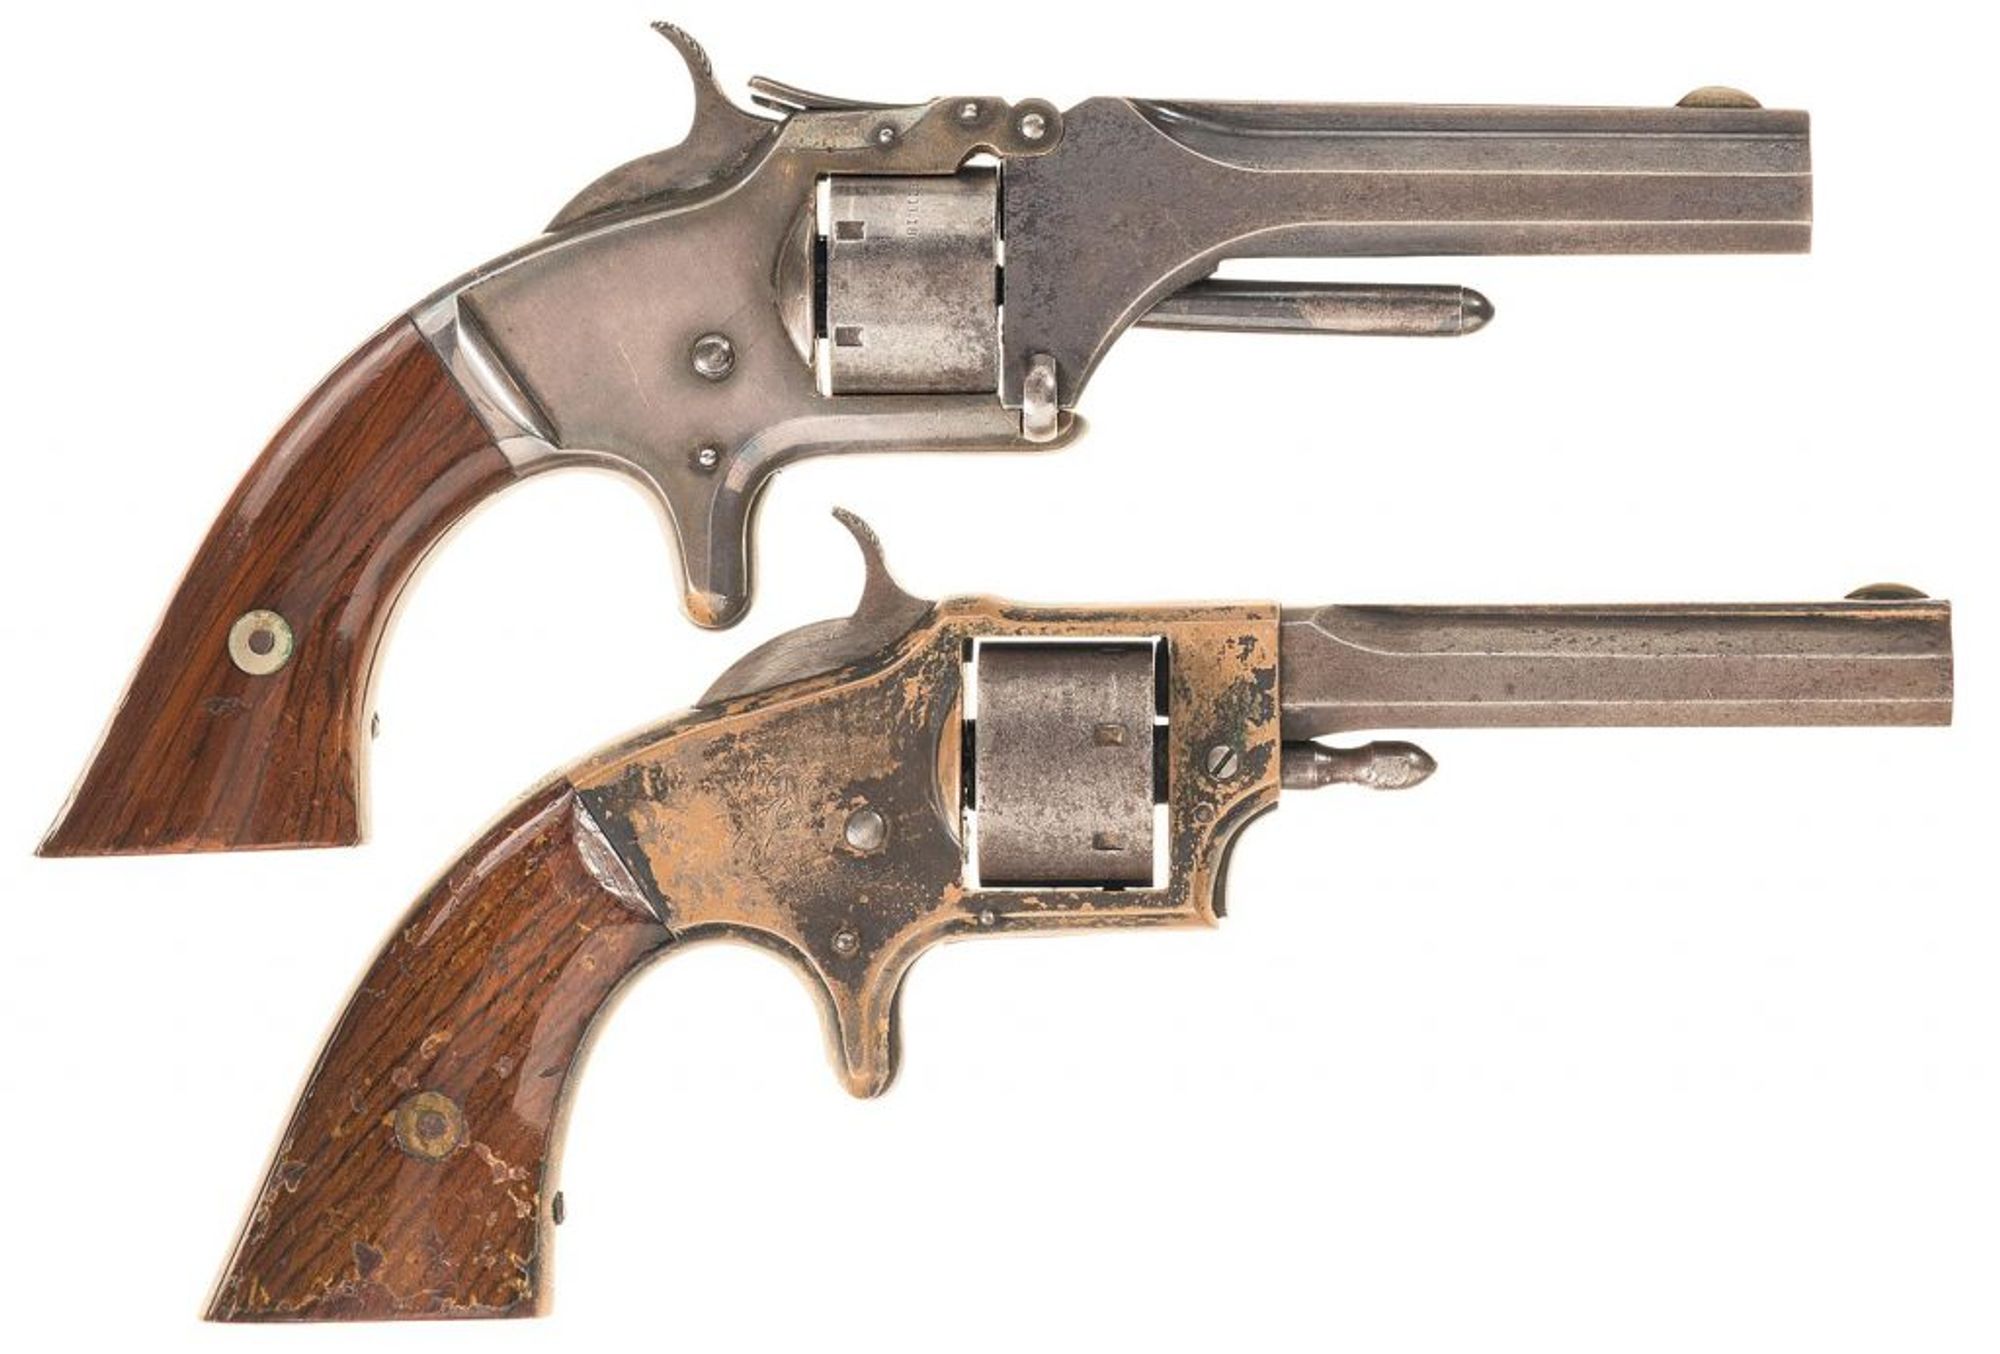 S&W and Rollin White revolvers